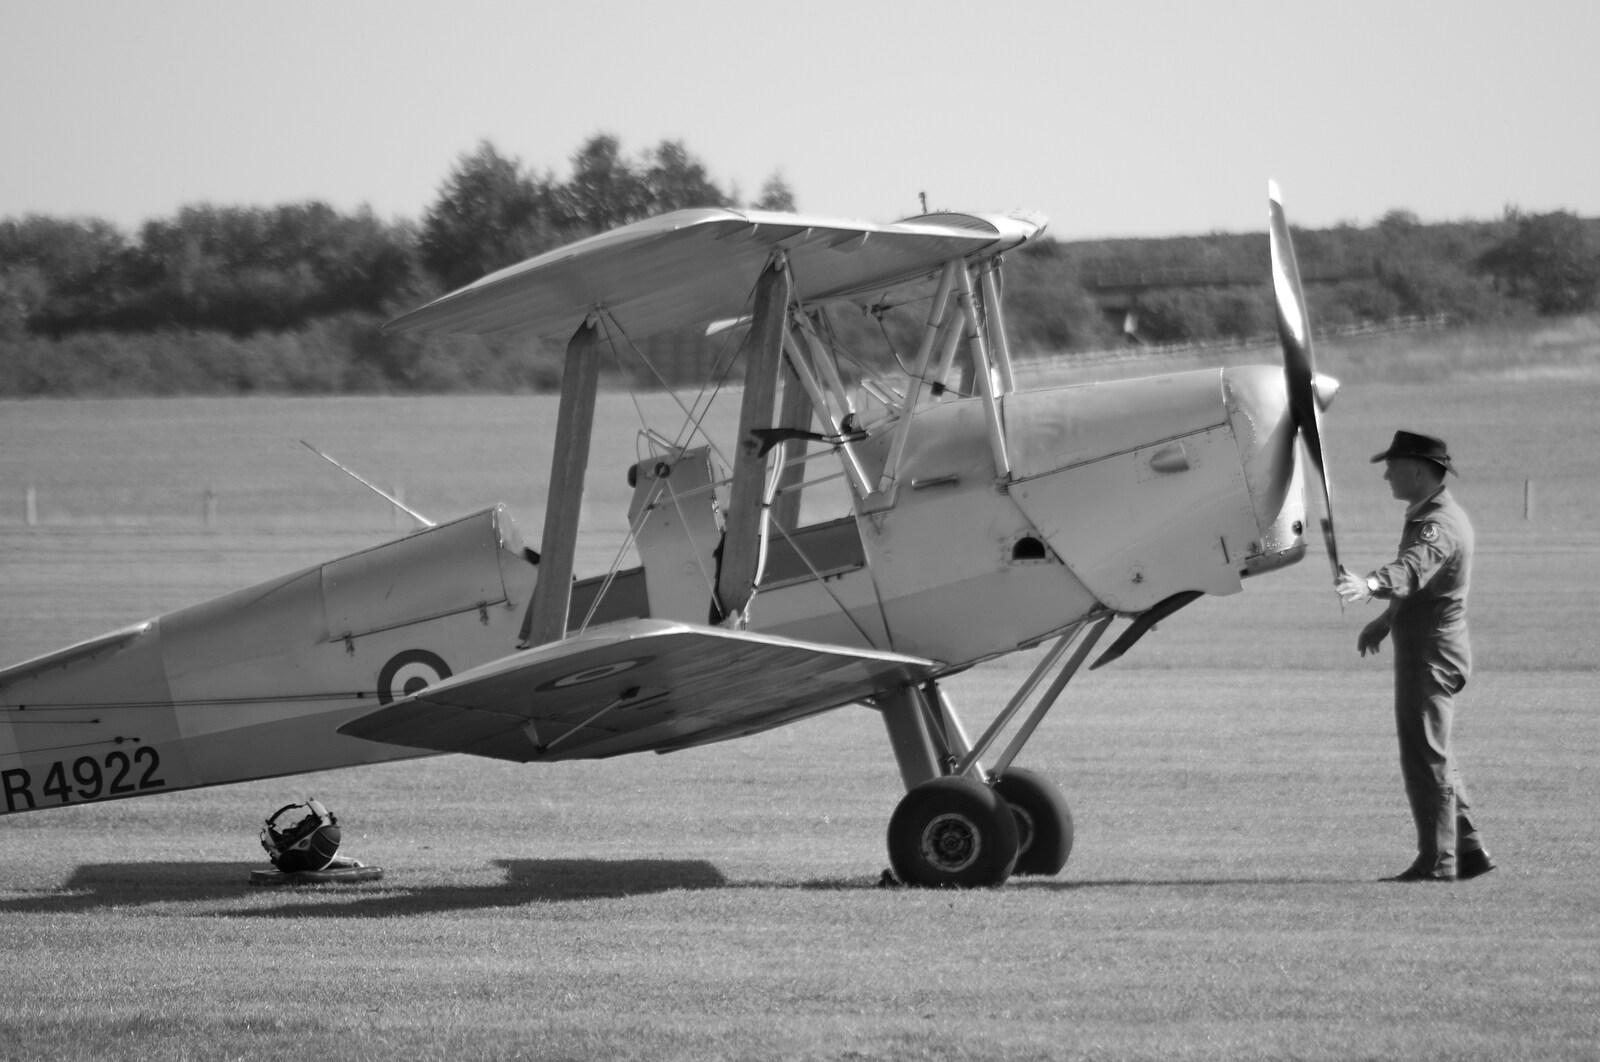 The Tiger Moth gets a hand start from The Duxford Dash, IWM Duxford, Cambridge - 13th September 2020